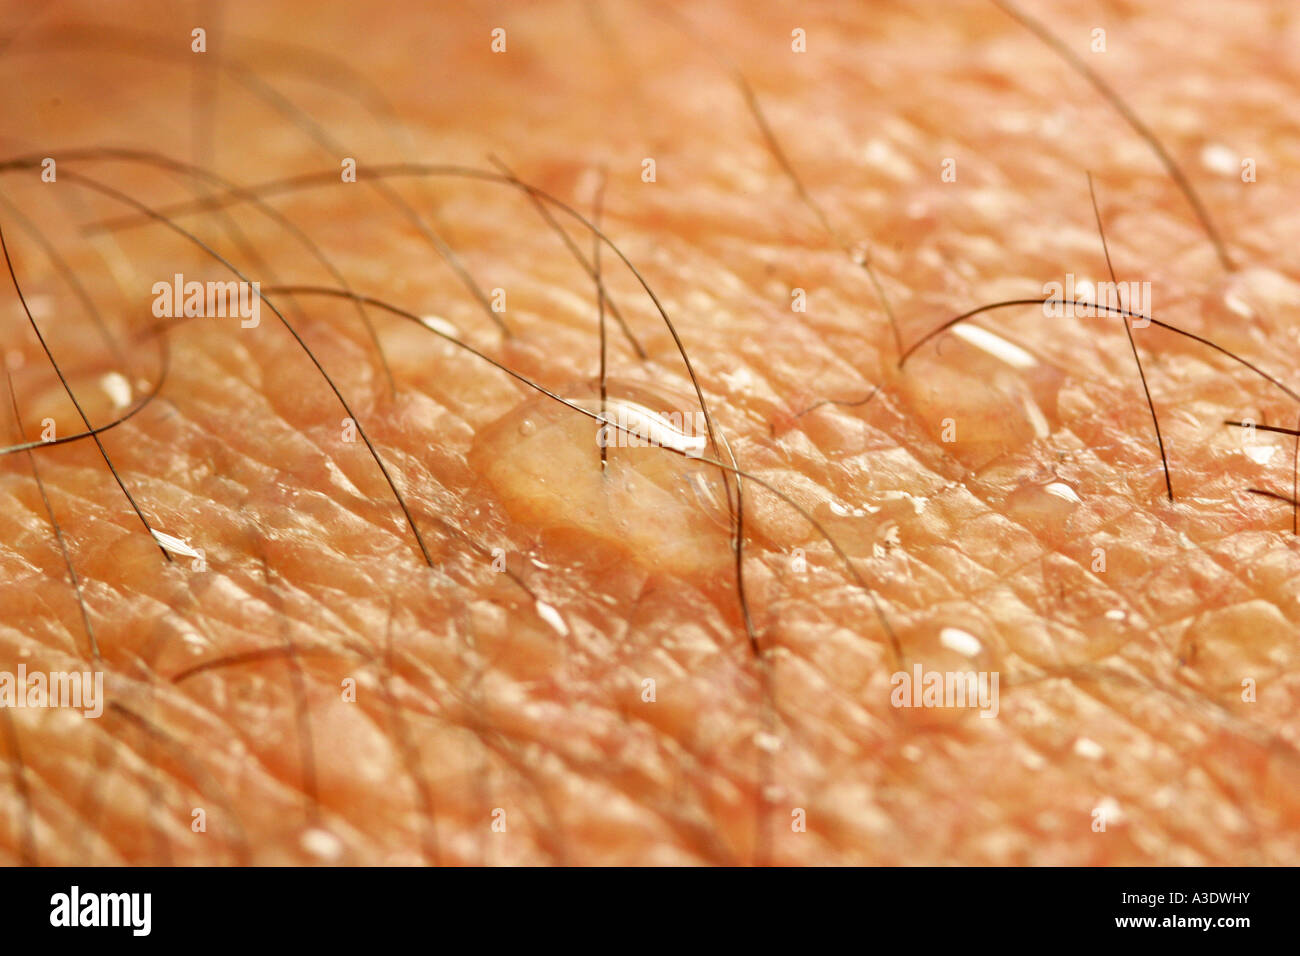 Makro shot of the human skin with sweat, hair and pores Stock Photo